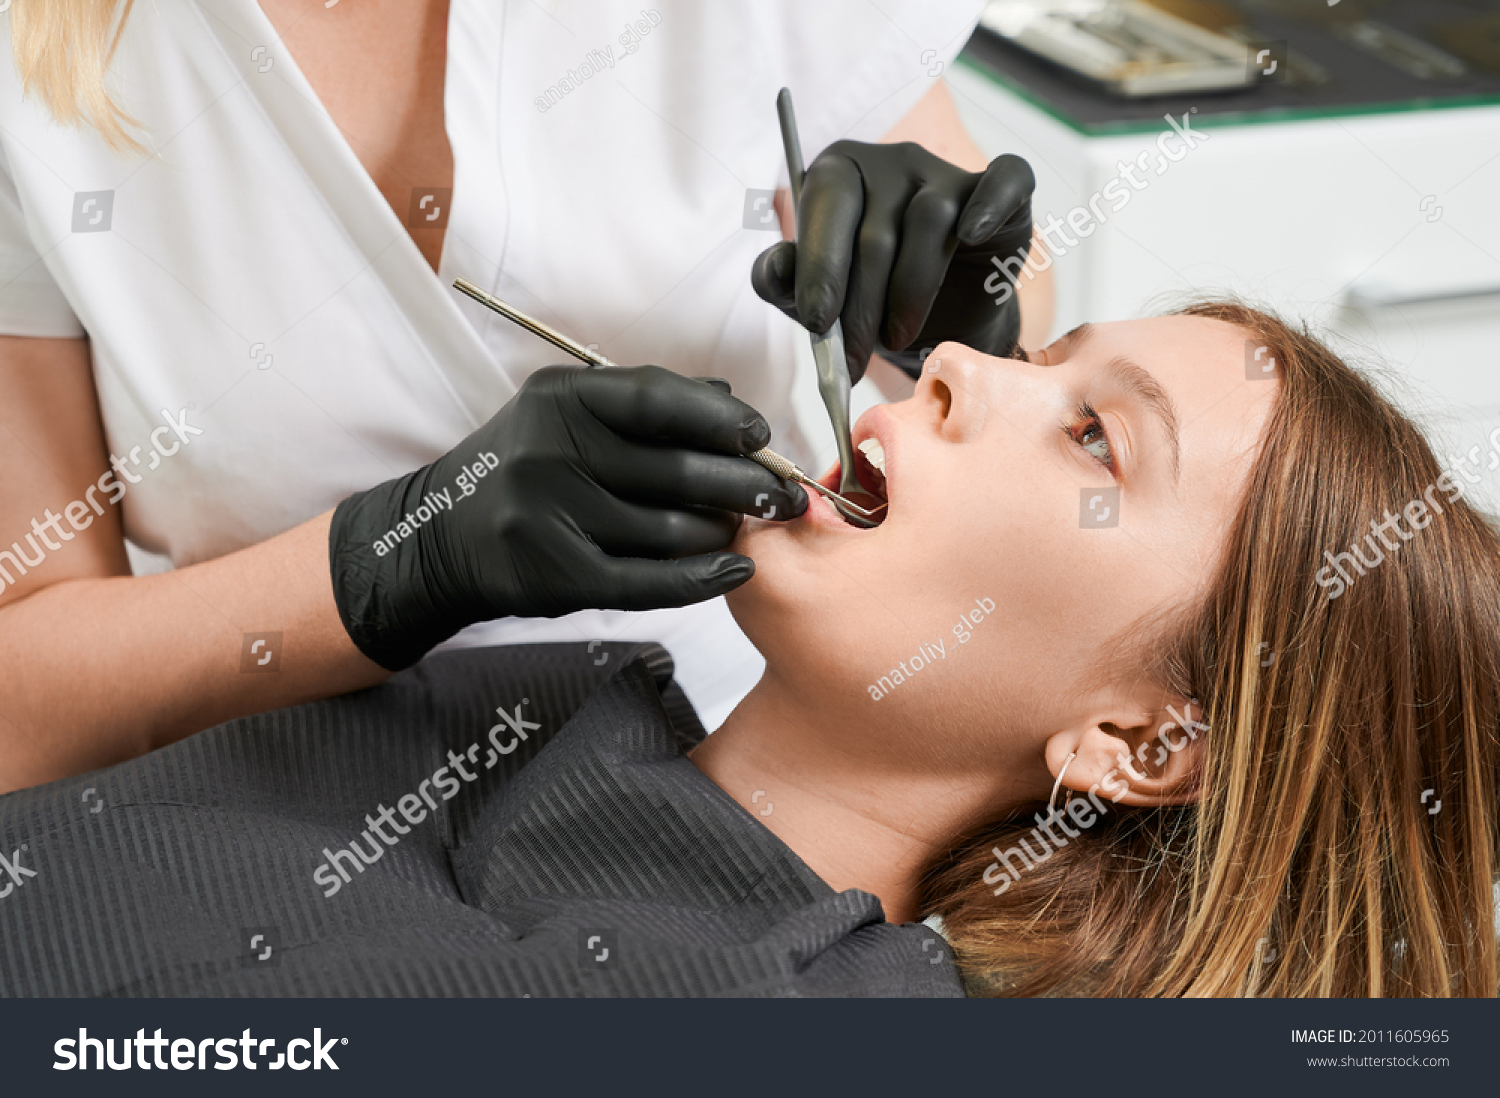 Female dentist in black sterile gloves examining patient teeth with dental explorer and mirror. Young woman lying in dental chair while having prophylactic examination. Concept of dentistry. #2011605965